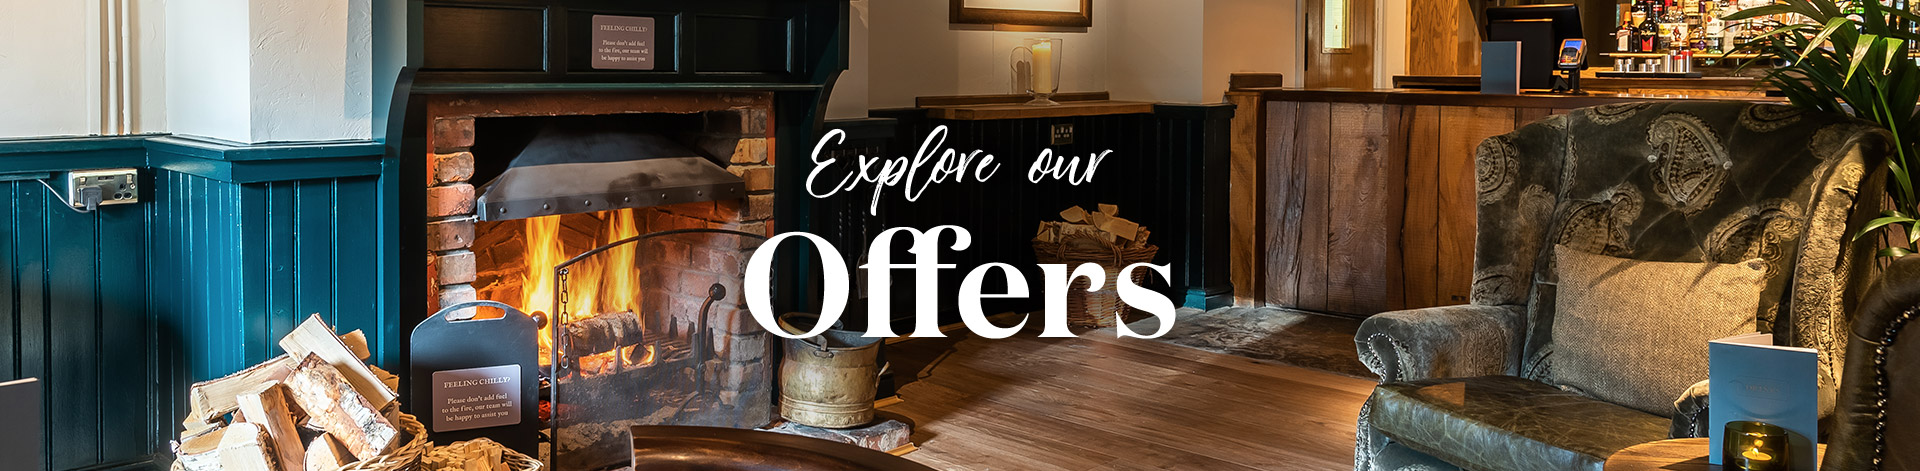 Our latest offers at The Cheshire Cat